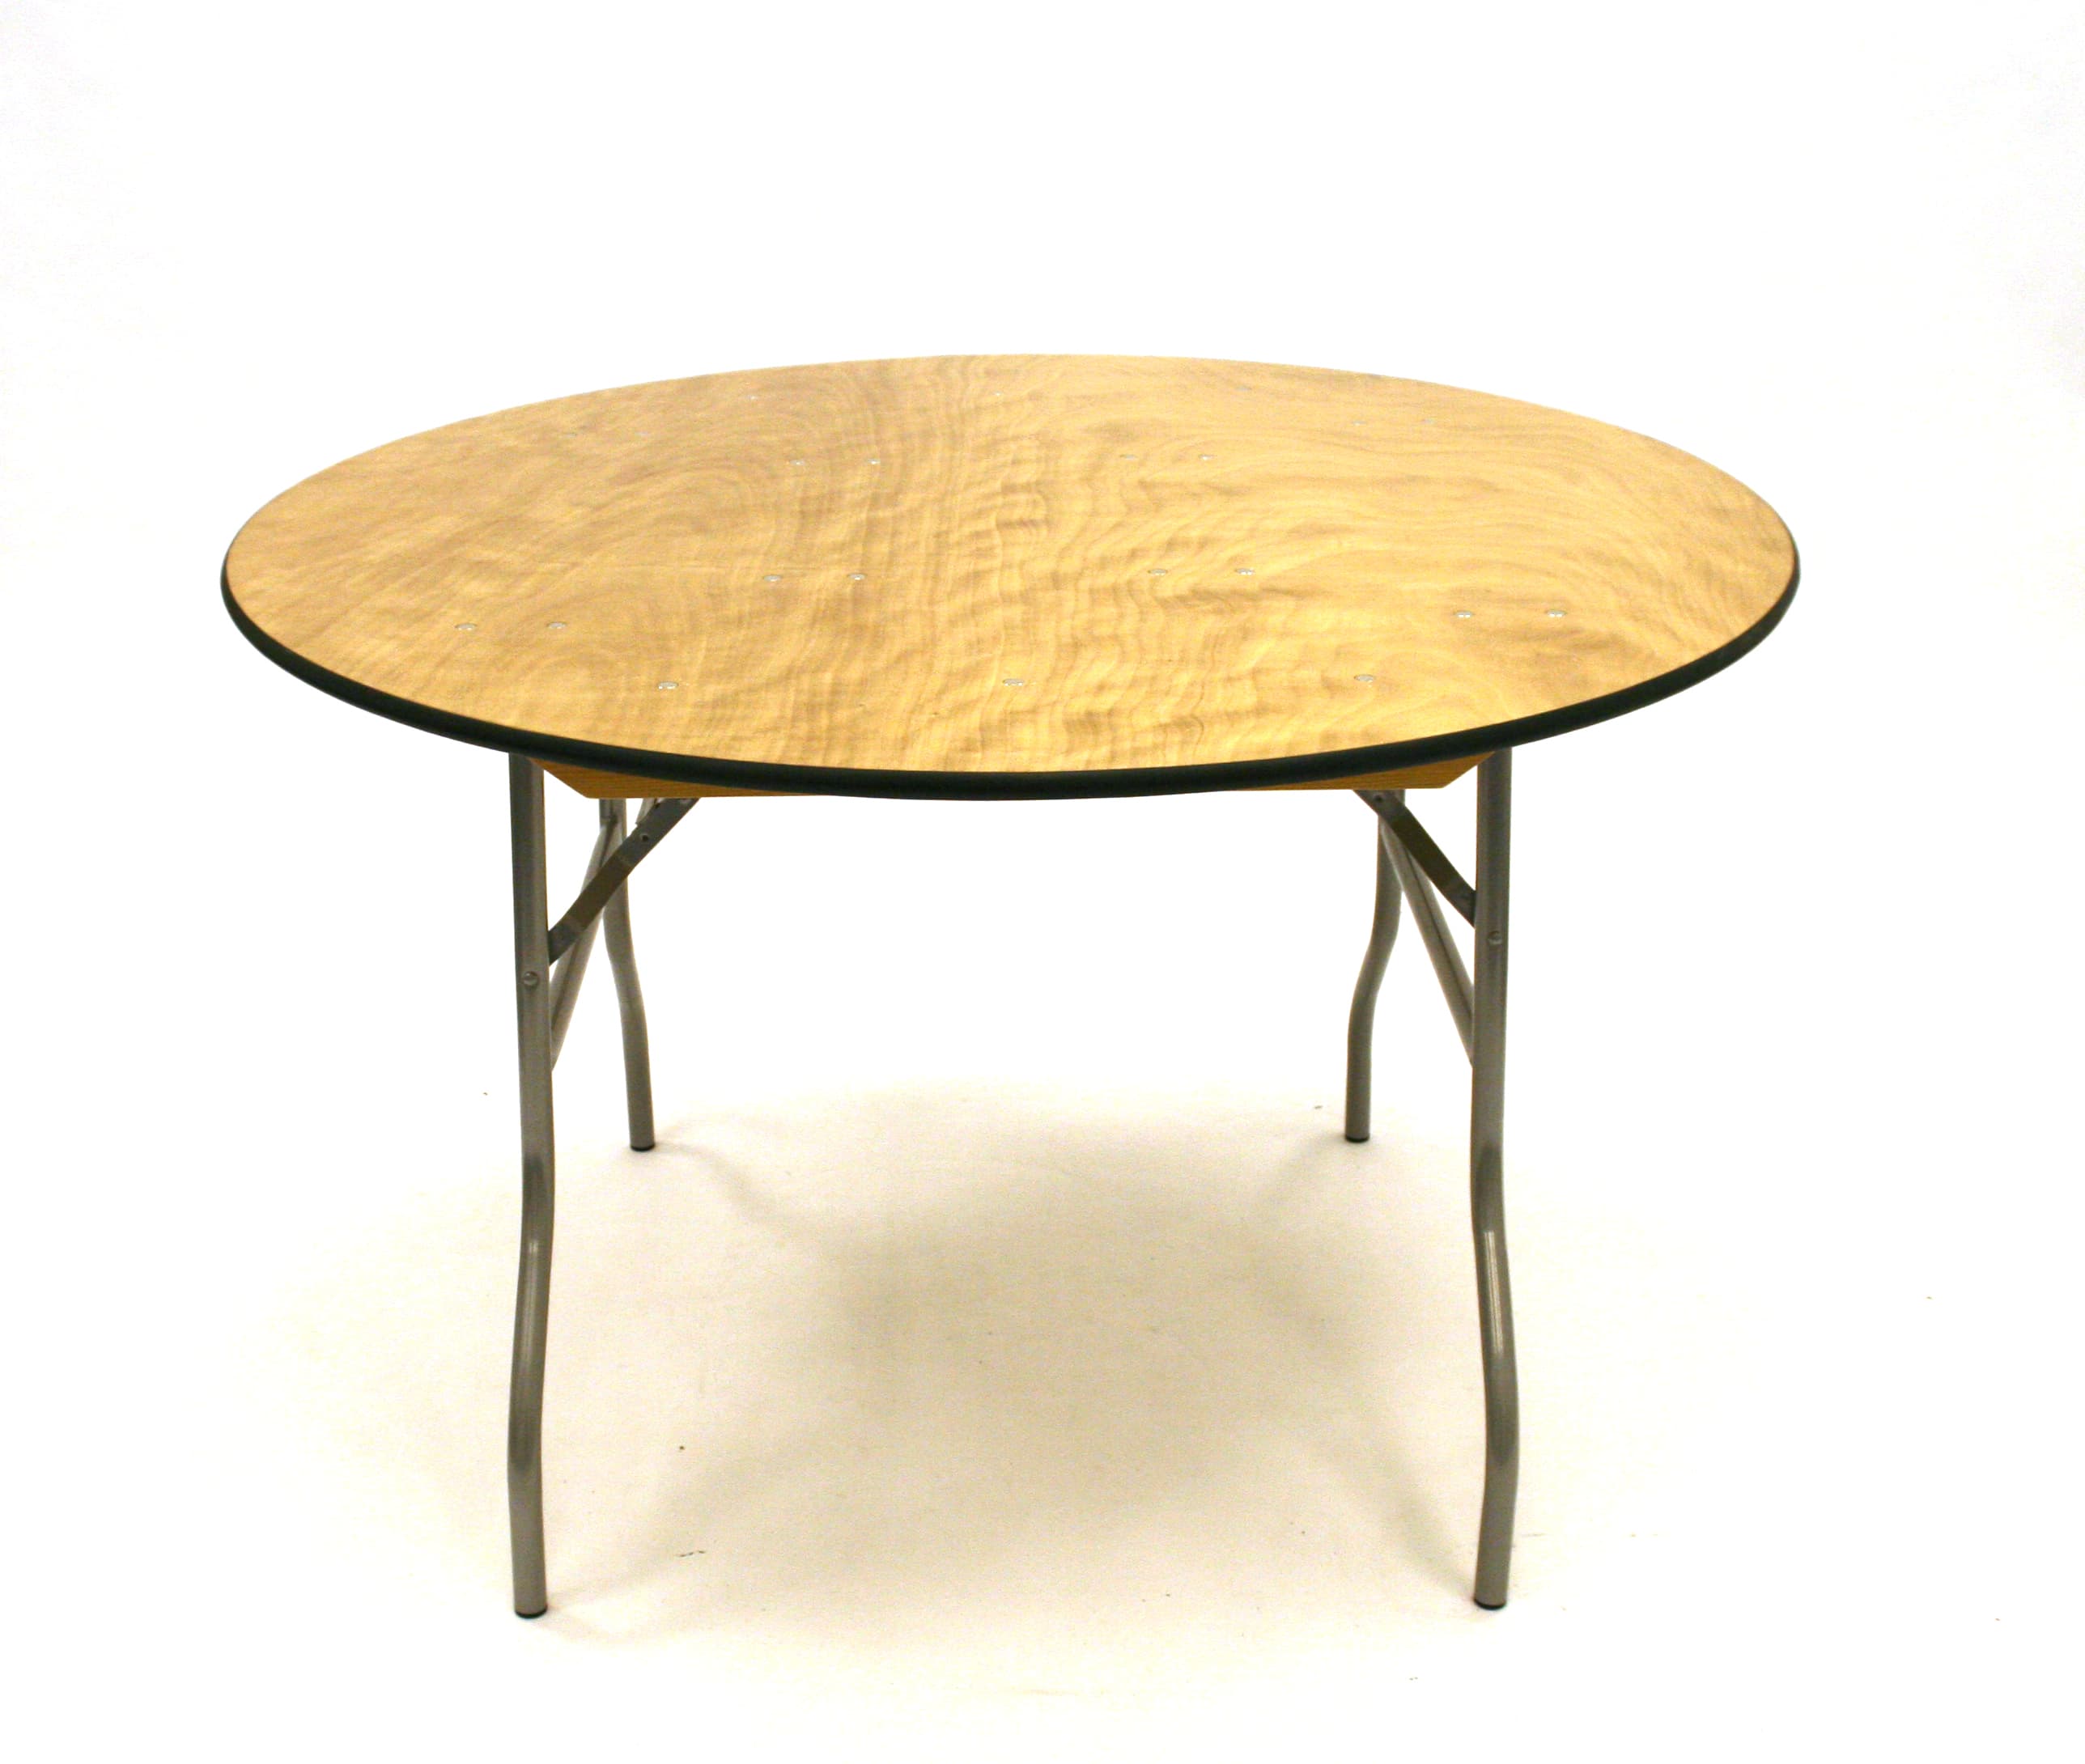 6 Foot Round Table Hire Weddings, Sizes Of Round Tables For Weddings